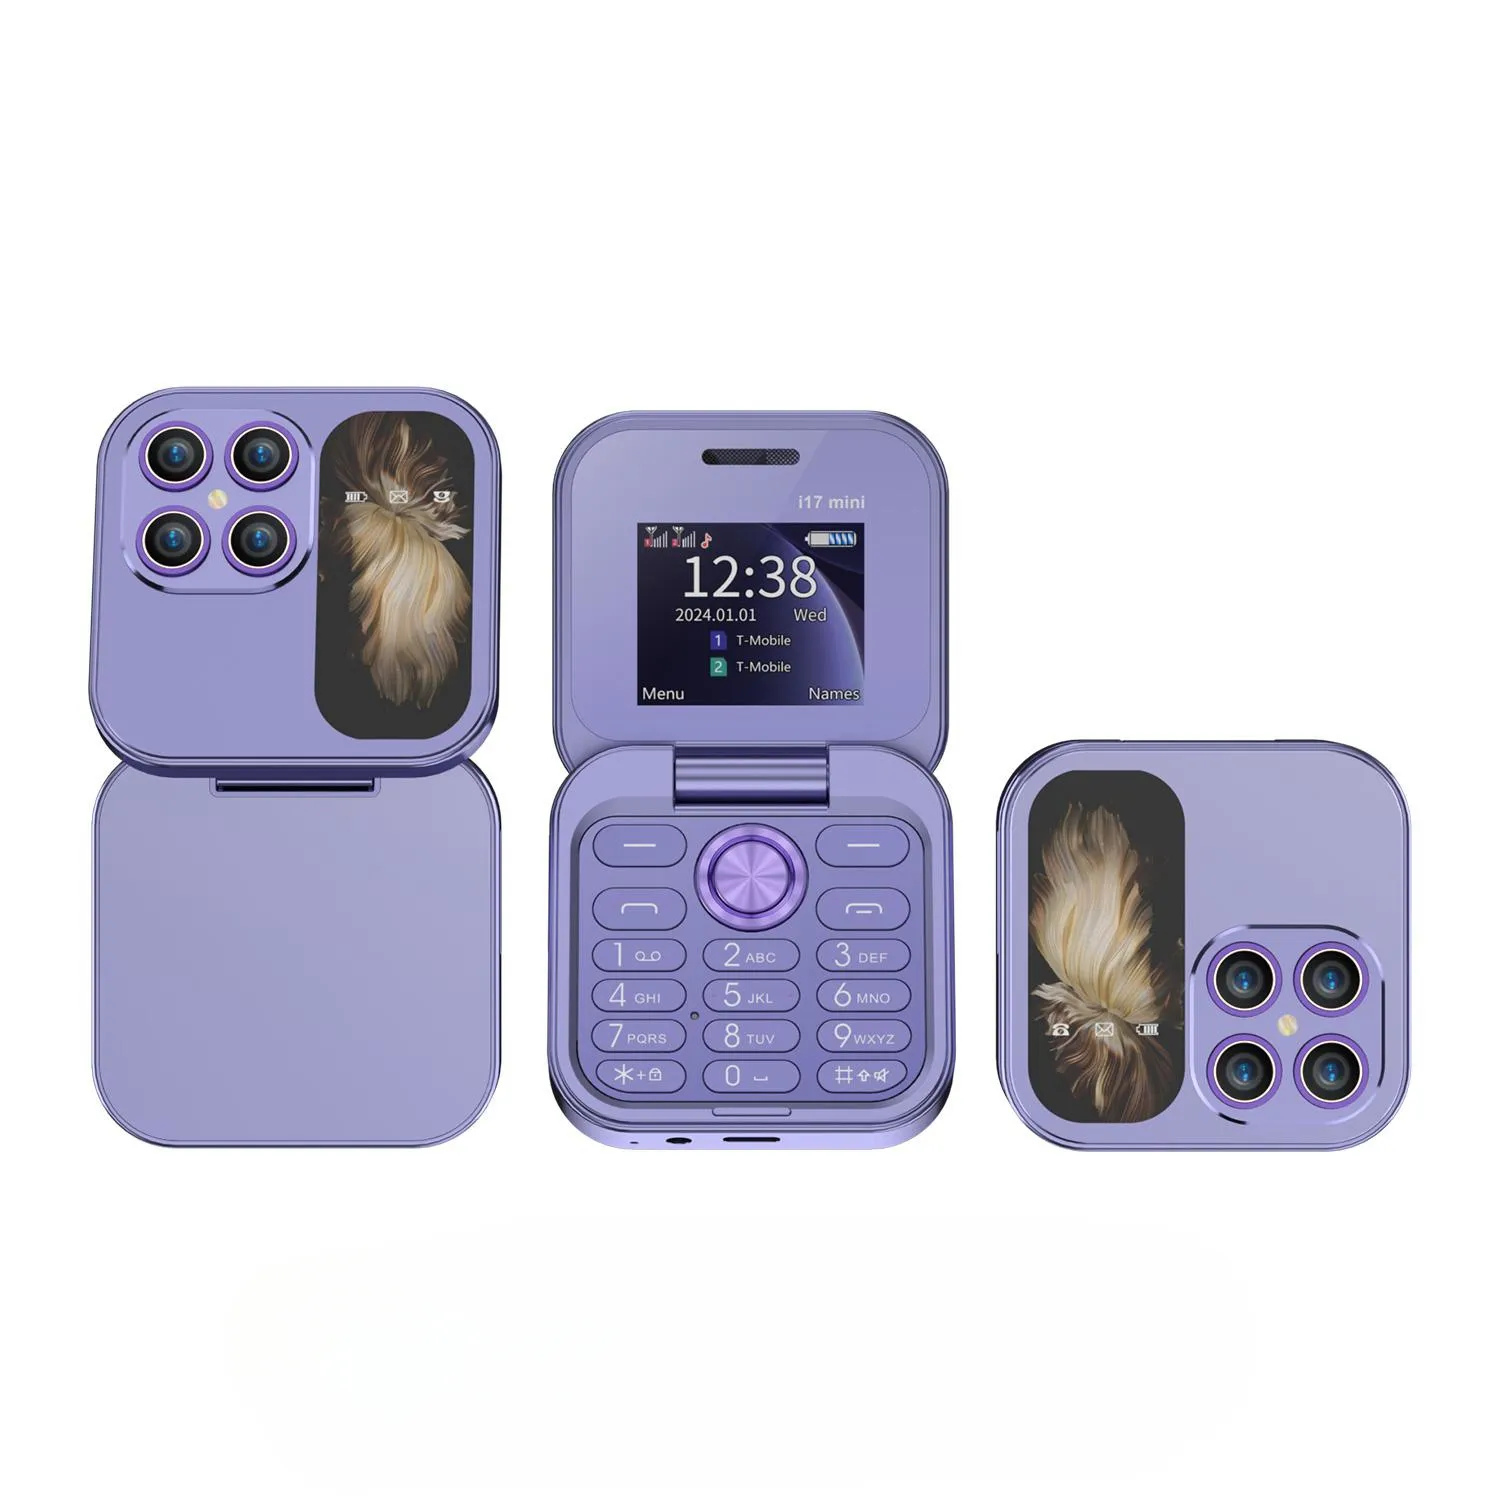 SERVO i17 Cute Flip Phone 2 SIM GSM Speed Dial Flashlight FM MP4 Magic Voice Camera Cover Style Clamshell Phones With 3.5mm jack